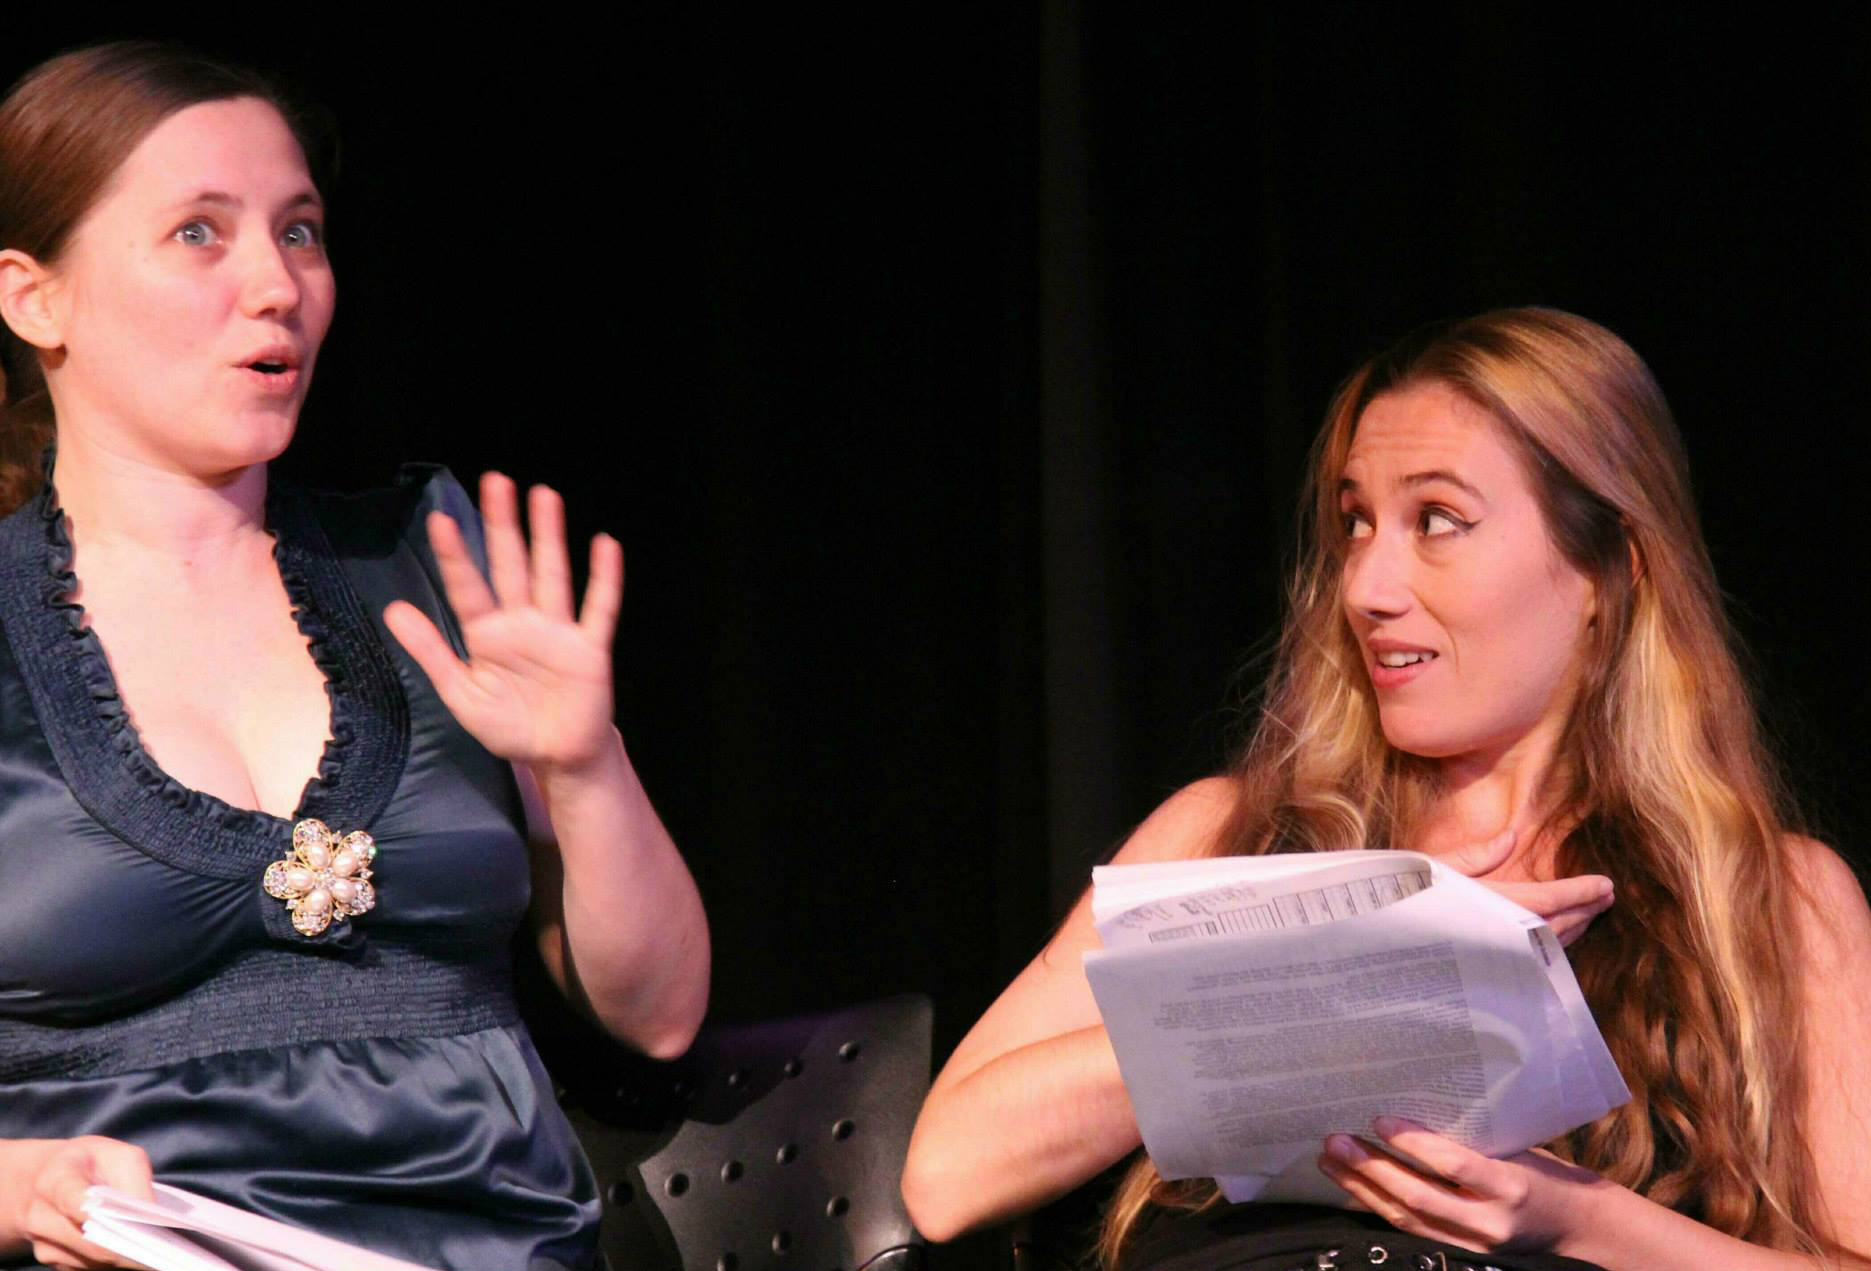 Two women actors hold scripts and act on stage